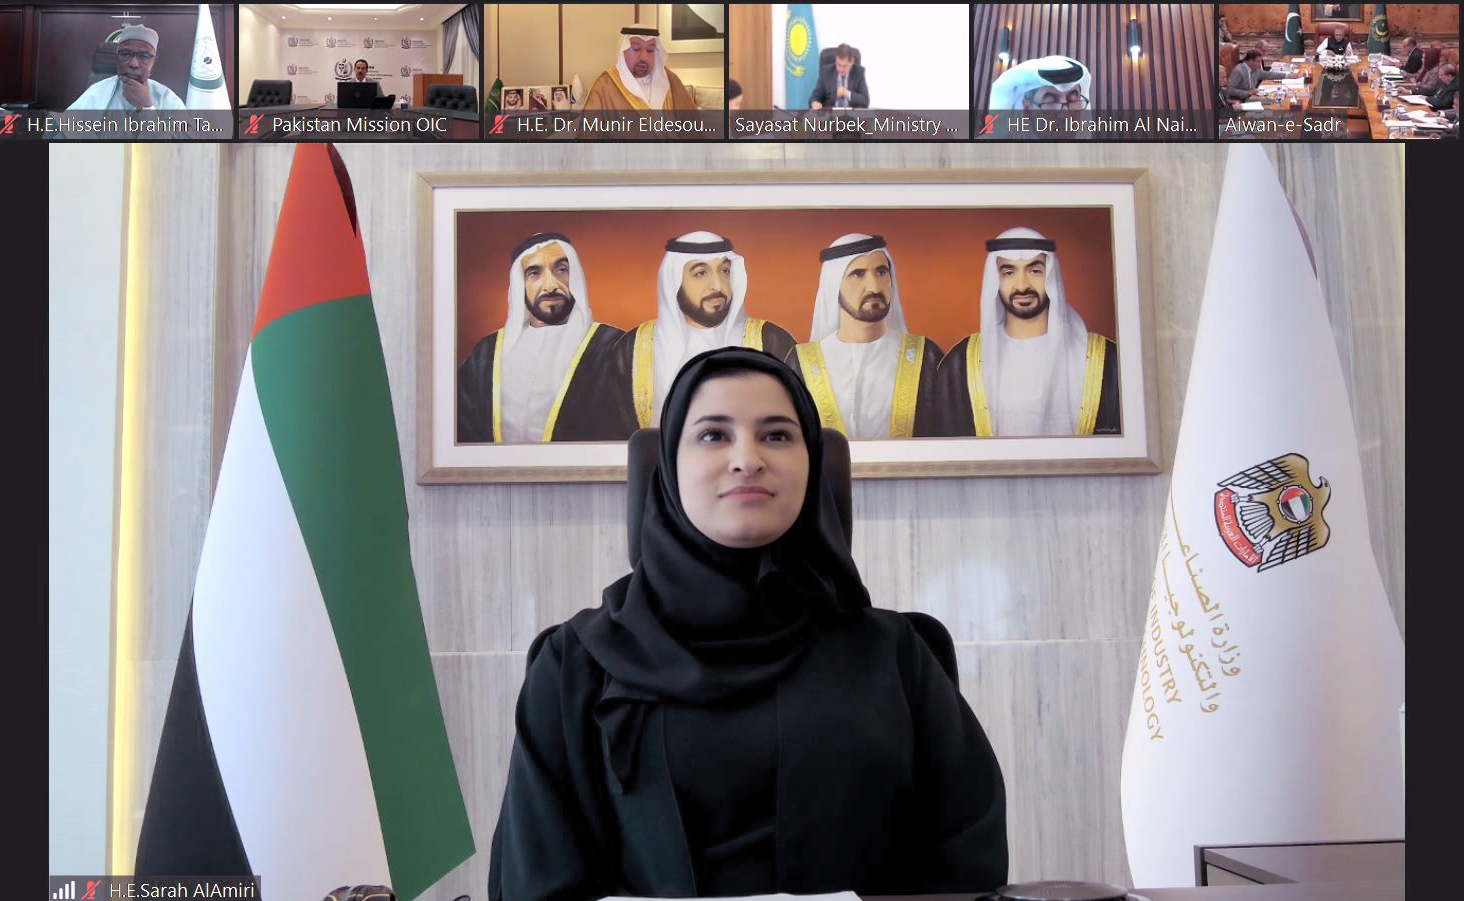 Her Excellency Sarah Al Amiri underlines the role of science and technology in industrial development during Executive Committee Meeting of COMSTECH